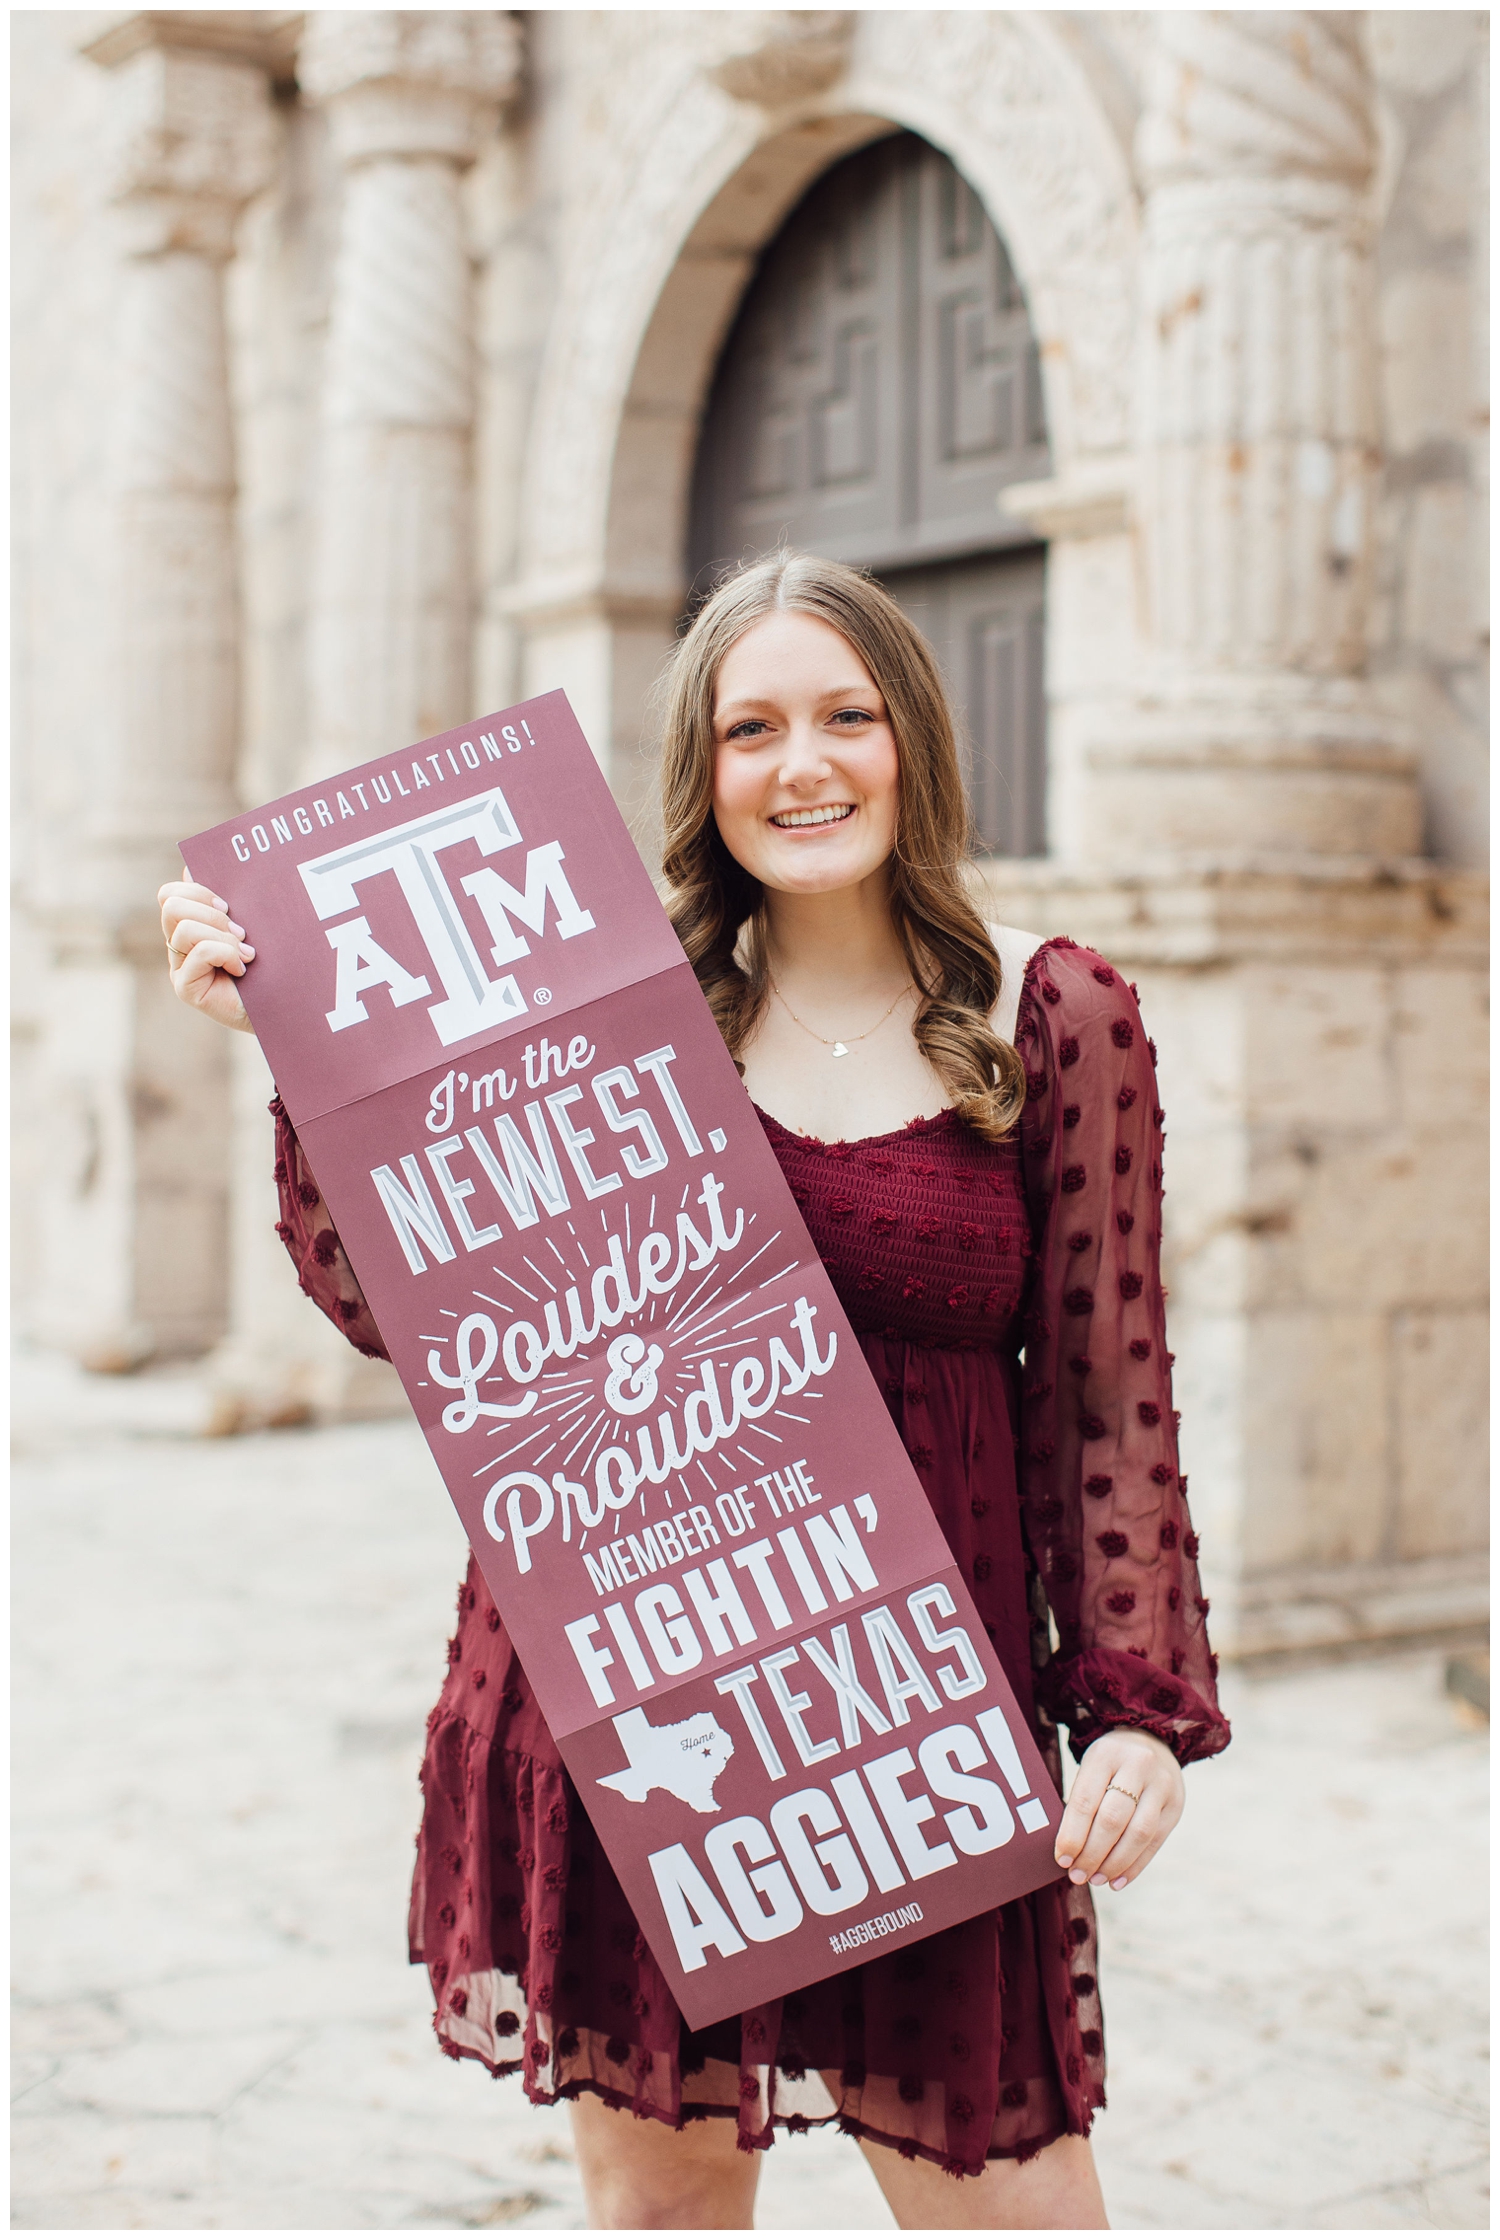 high school senior in maroon dress holding Aggie sign Cypress senior photographer at Cy-Hope